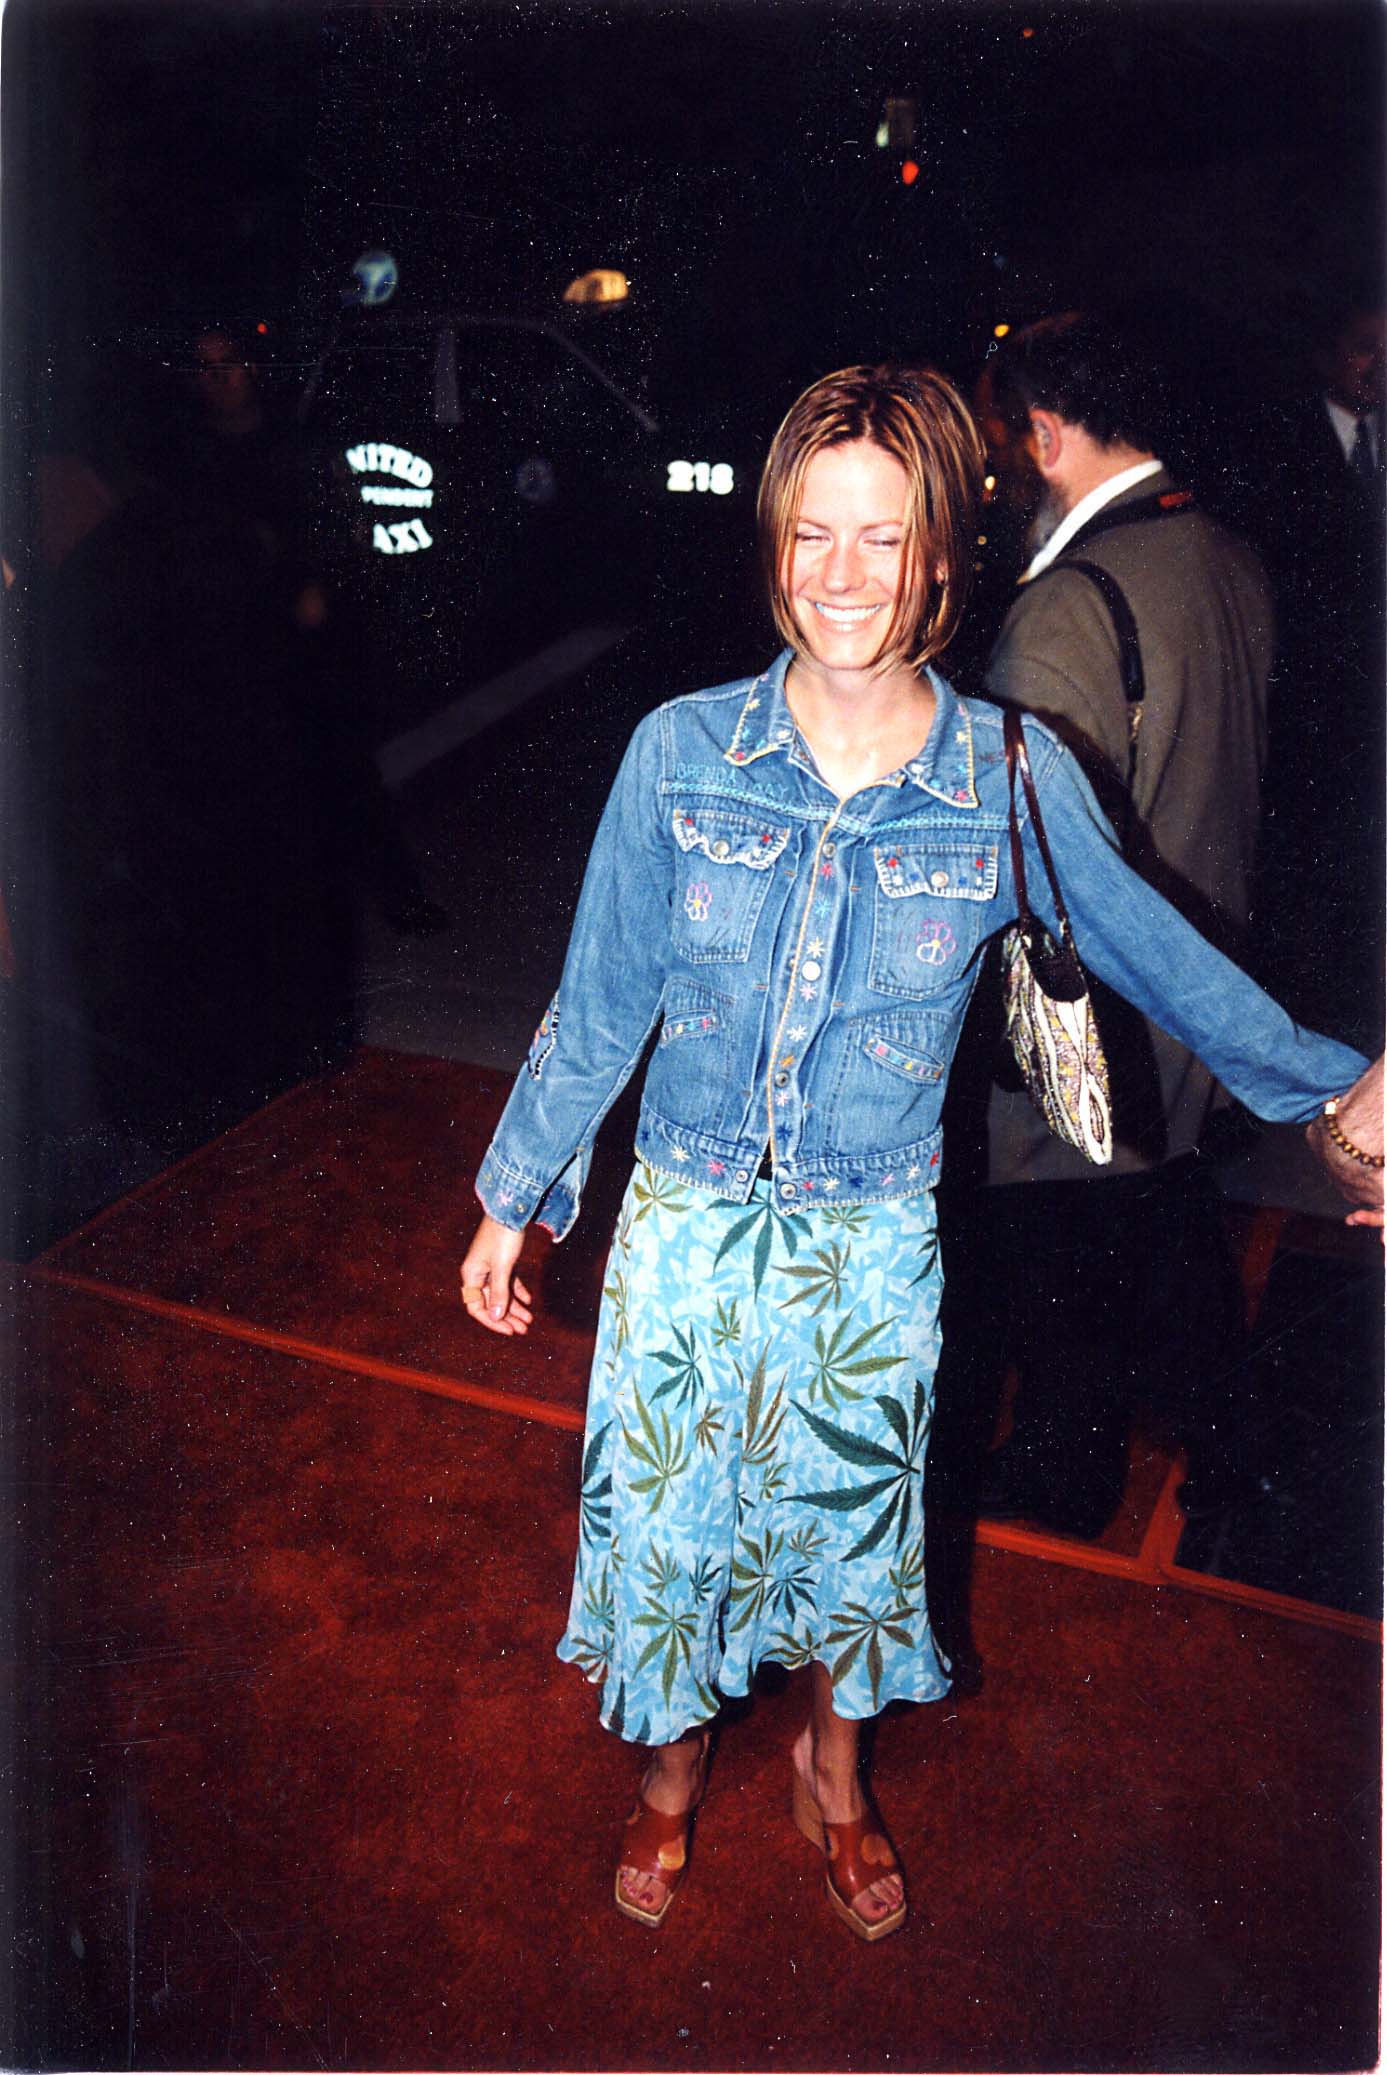 Courtney Brooke Wagner during the premiere of "High Fidelity" at El Capitan Theatre on March 28, 2000 in Hollywood, California ┃Source: Getty Images